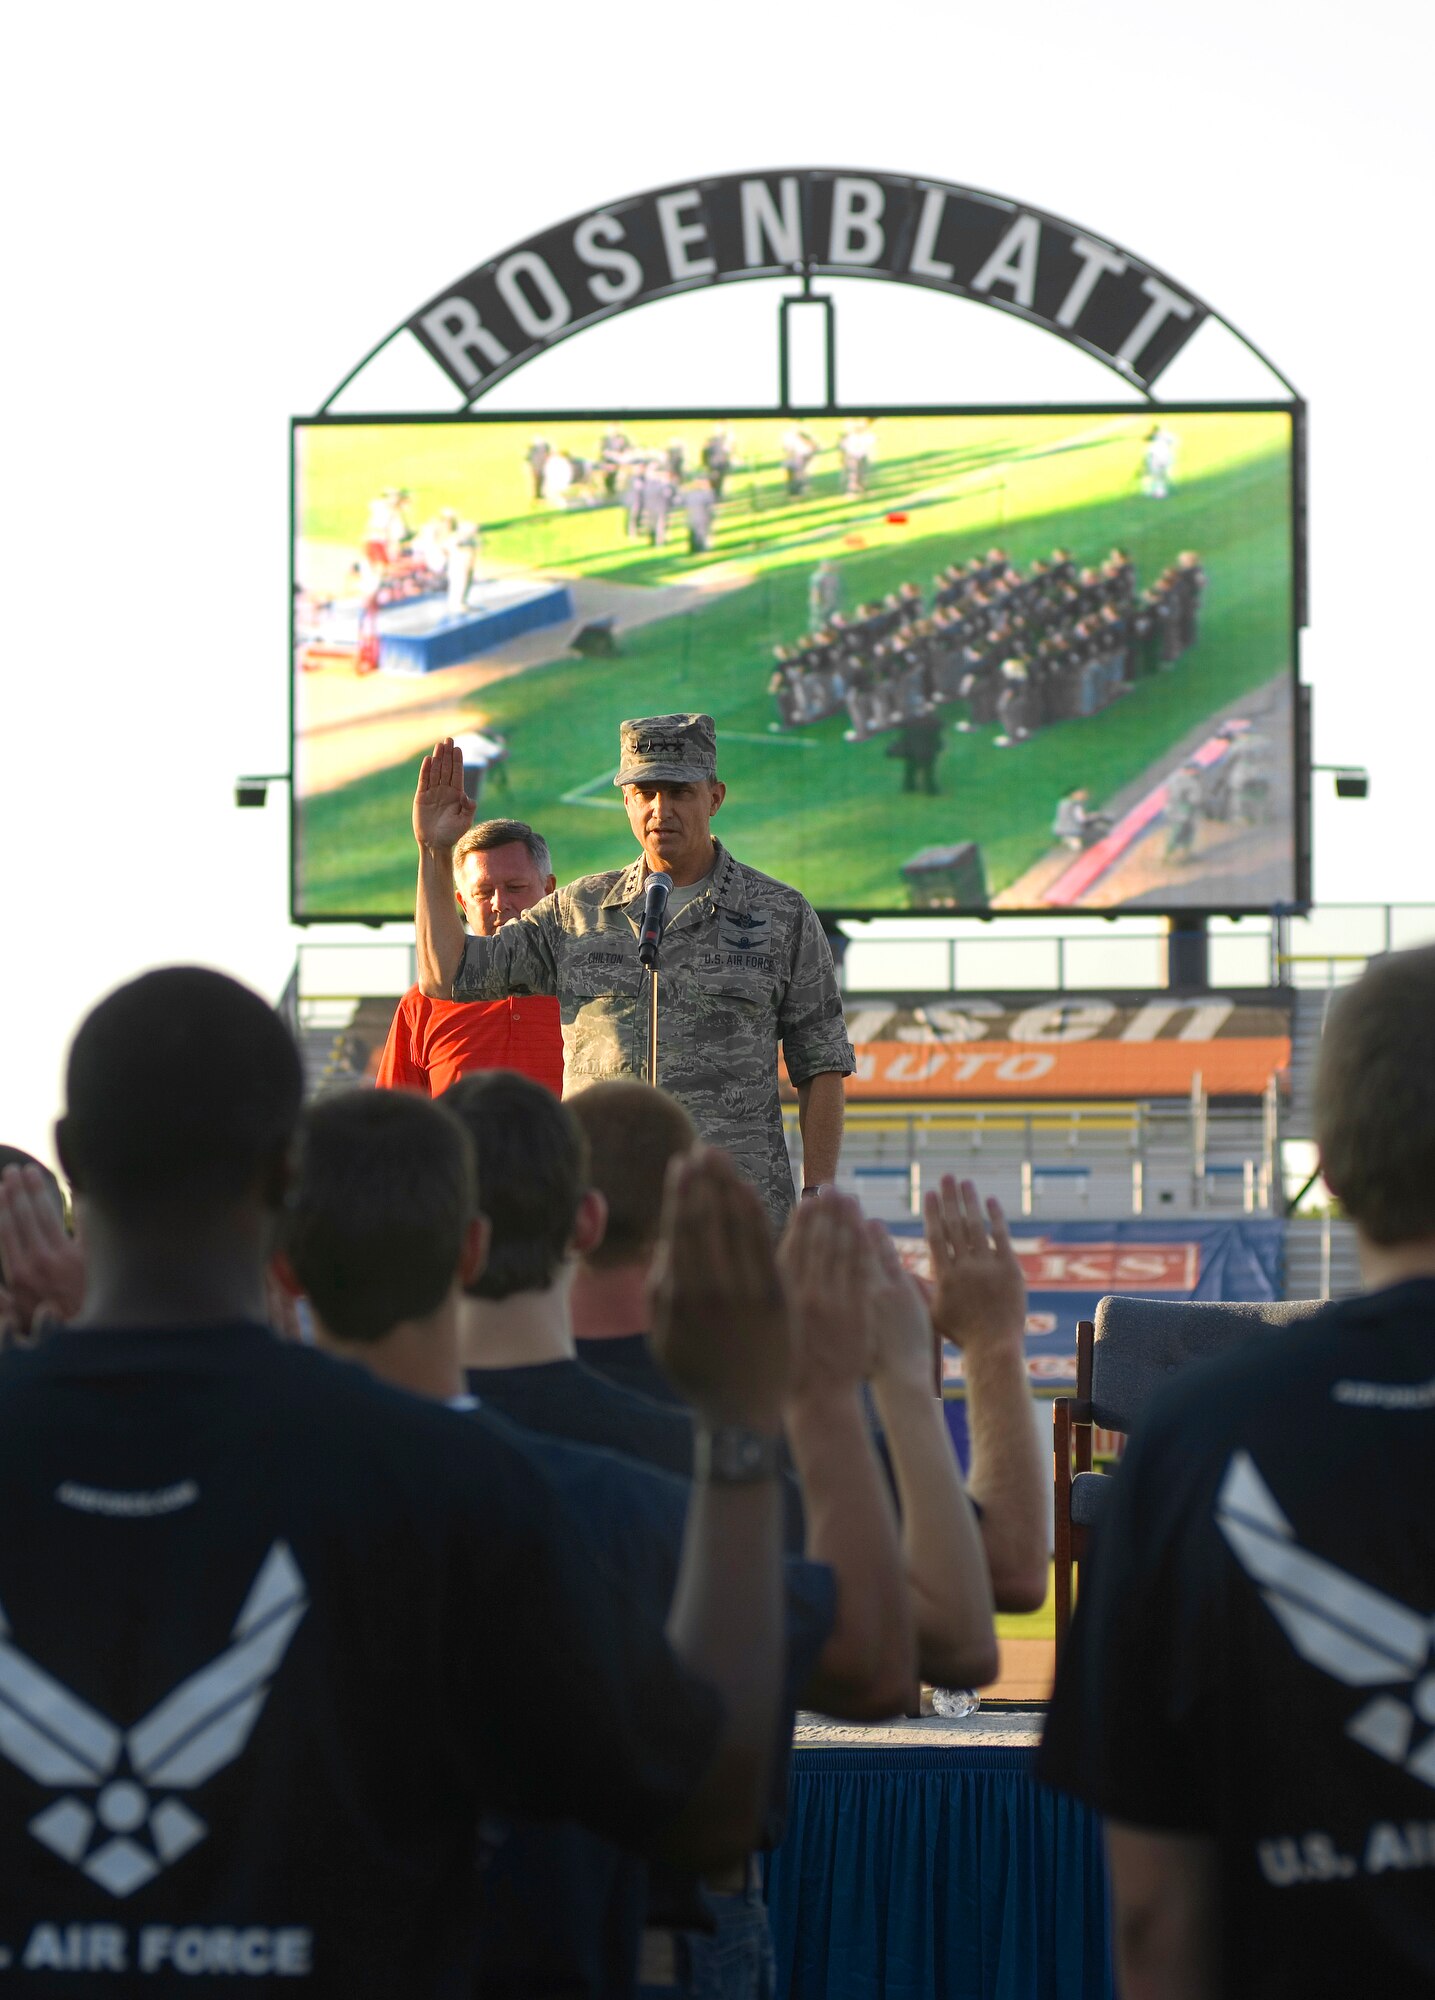 Gen. Kevin P. Chilton administers the oath of enlistment to approximately 50 new recruits during a proclamation ceremony as part of Air Force Week in the Heartland Aug. 9 at Rosenblatt Stadium in Omaha, Neb. The week is designed to broaden awareness of the Air Force's role in the war on terrorism and strengthen support for Airmen serving worldwide in defense of freedom. General Chilton is the commander of U.S. Strategic Command at Offutt Air Force Base, Neb. (U.S. Air Force photo/Staff Sgt. Bennie J. Davis III)